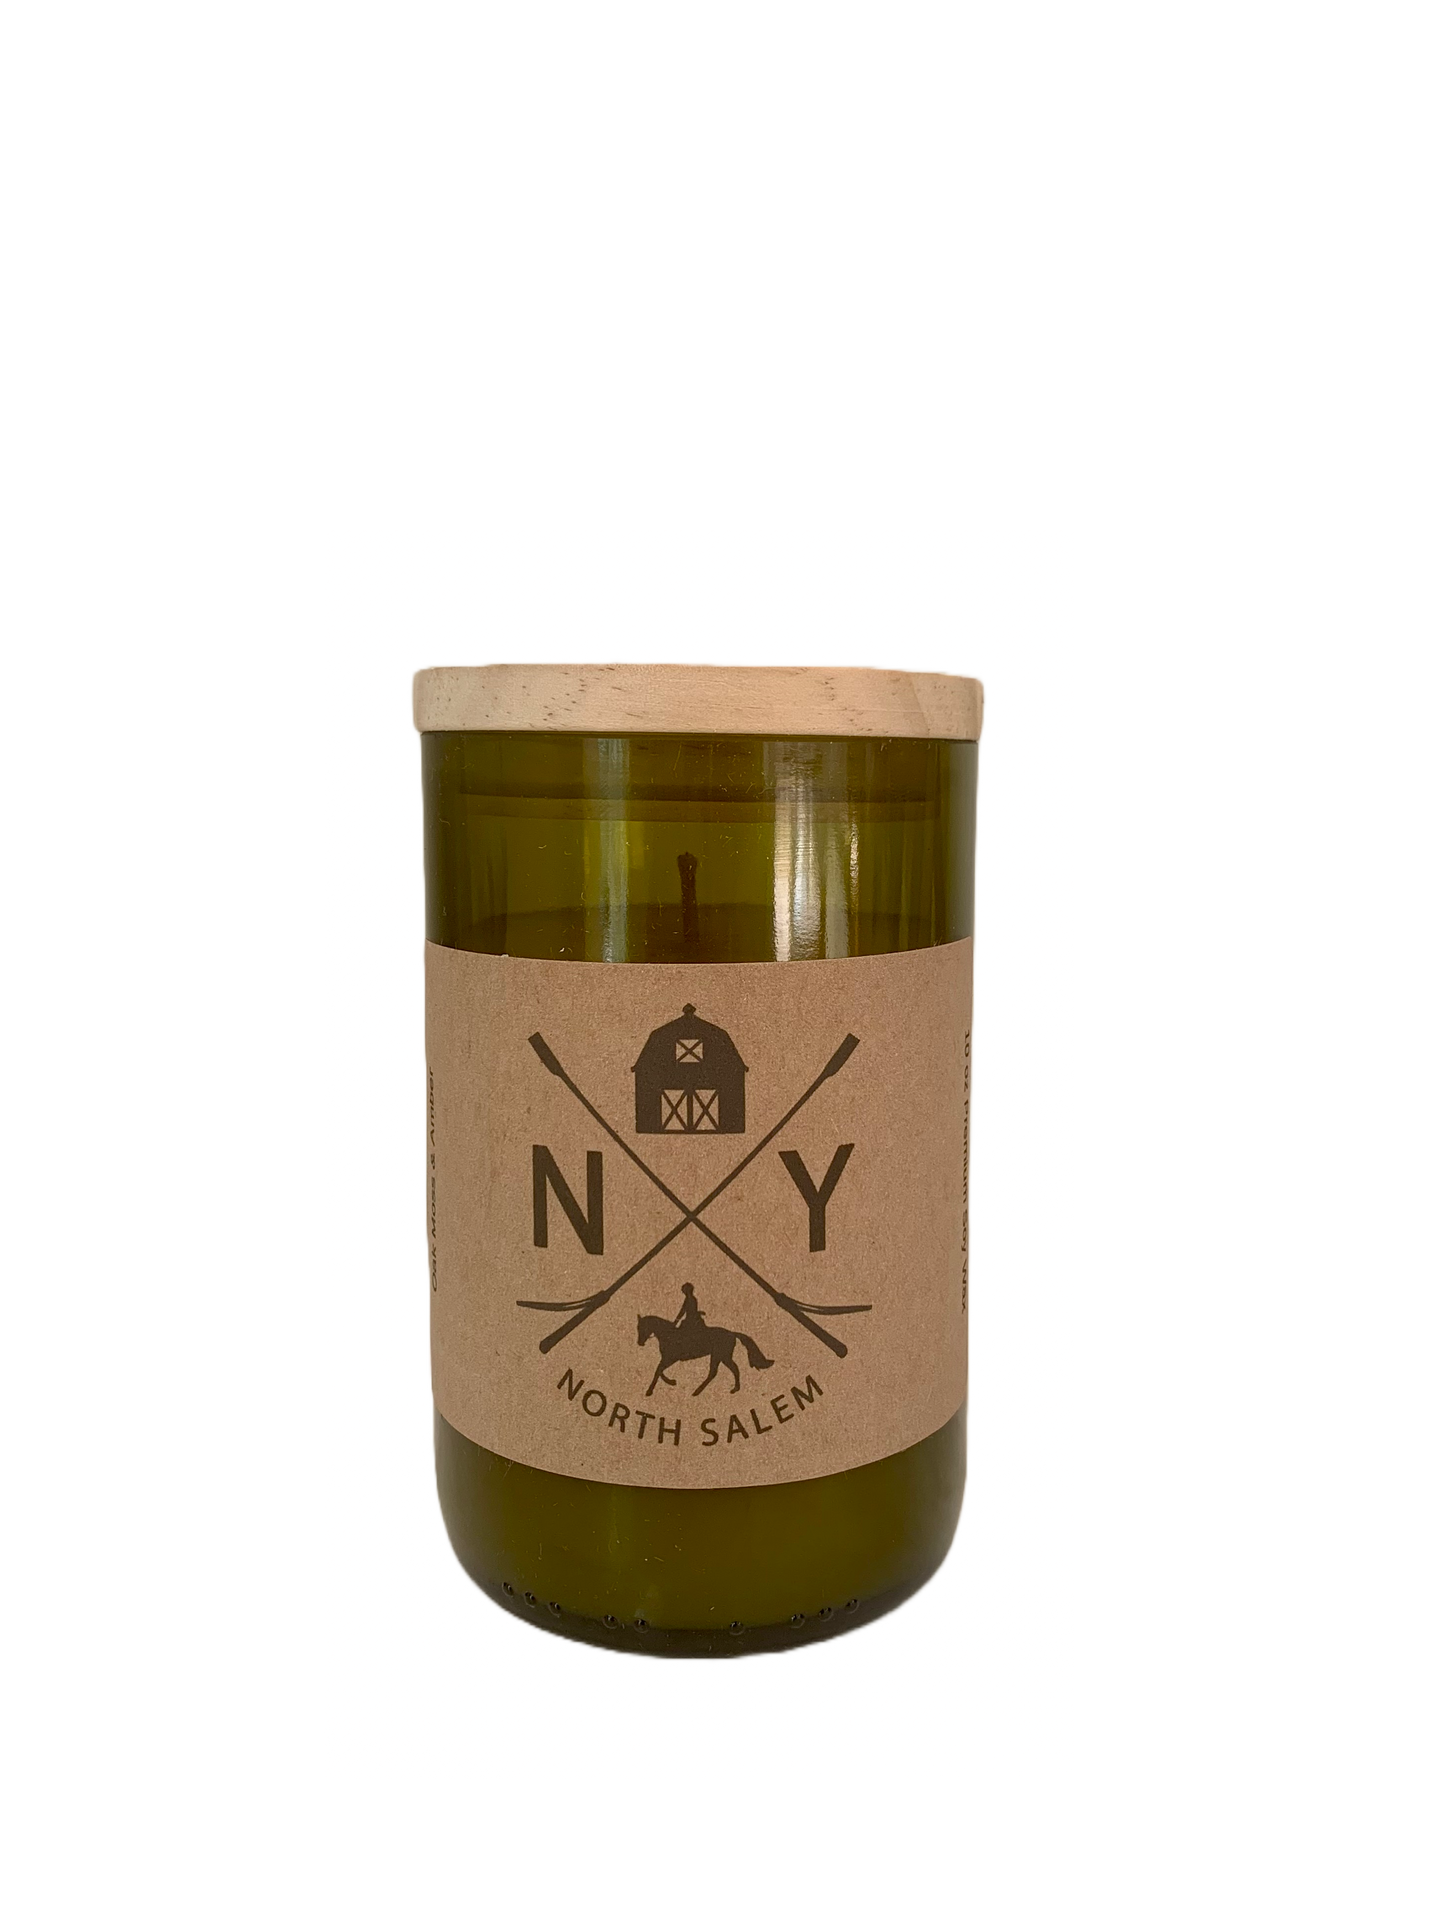 North Salem Recycled Wine Bottle Soy Candle